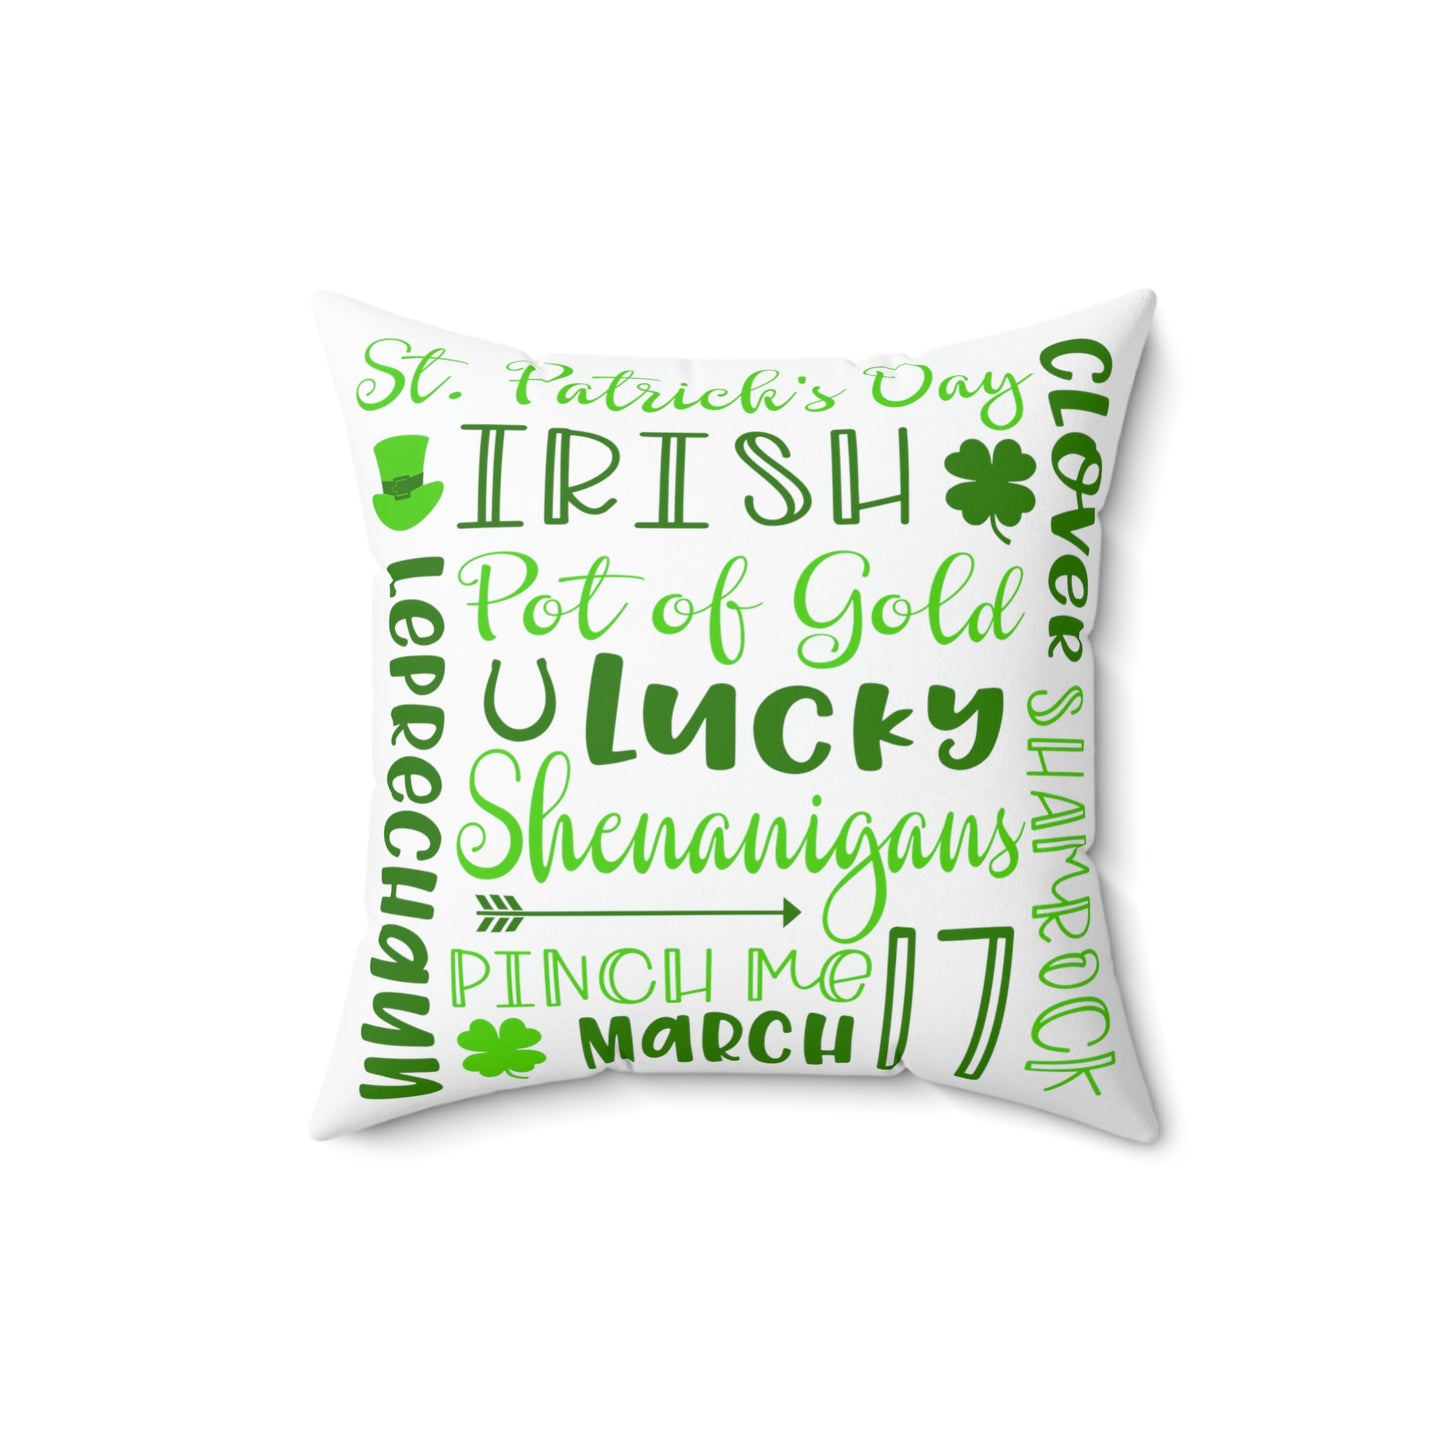 St Patrick's Day Pillow, St Patrick's Day Decor, Shamrock Pillow, St Patrick's Day Cushion, St Patrick's Day Gift, Green Decor